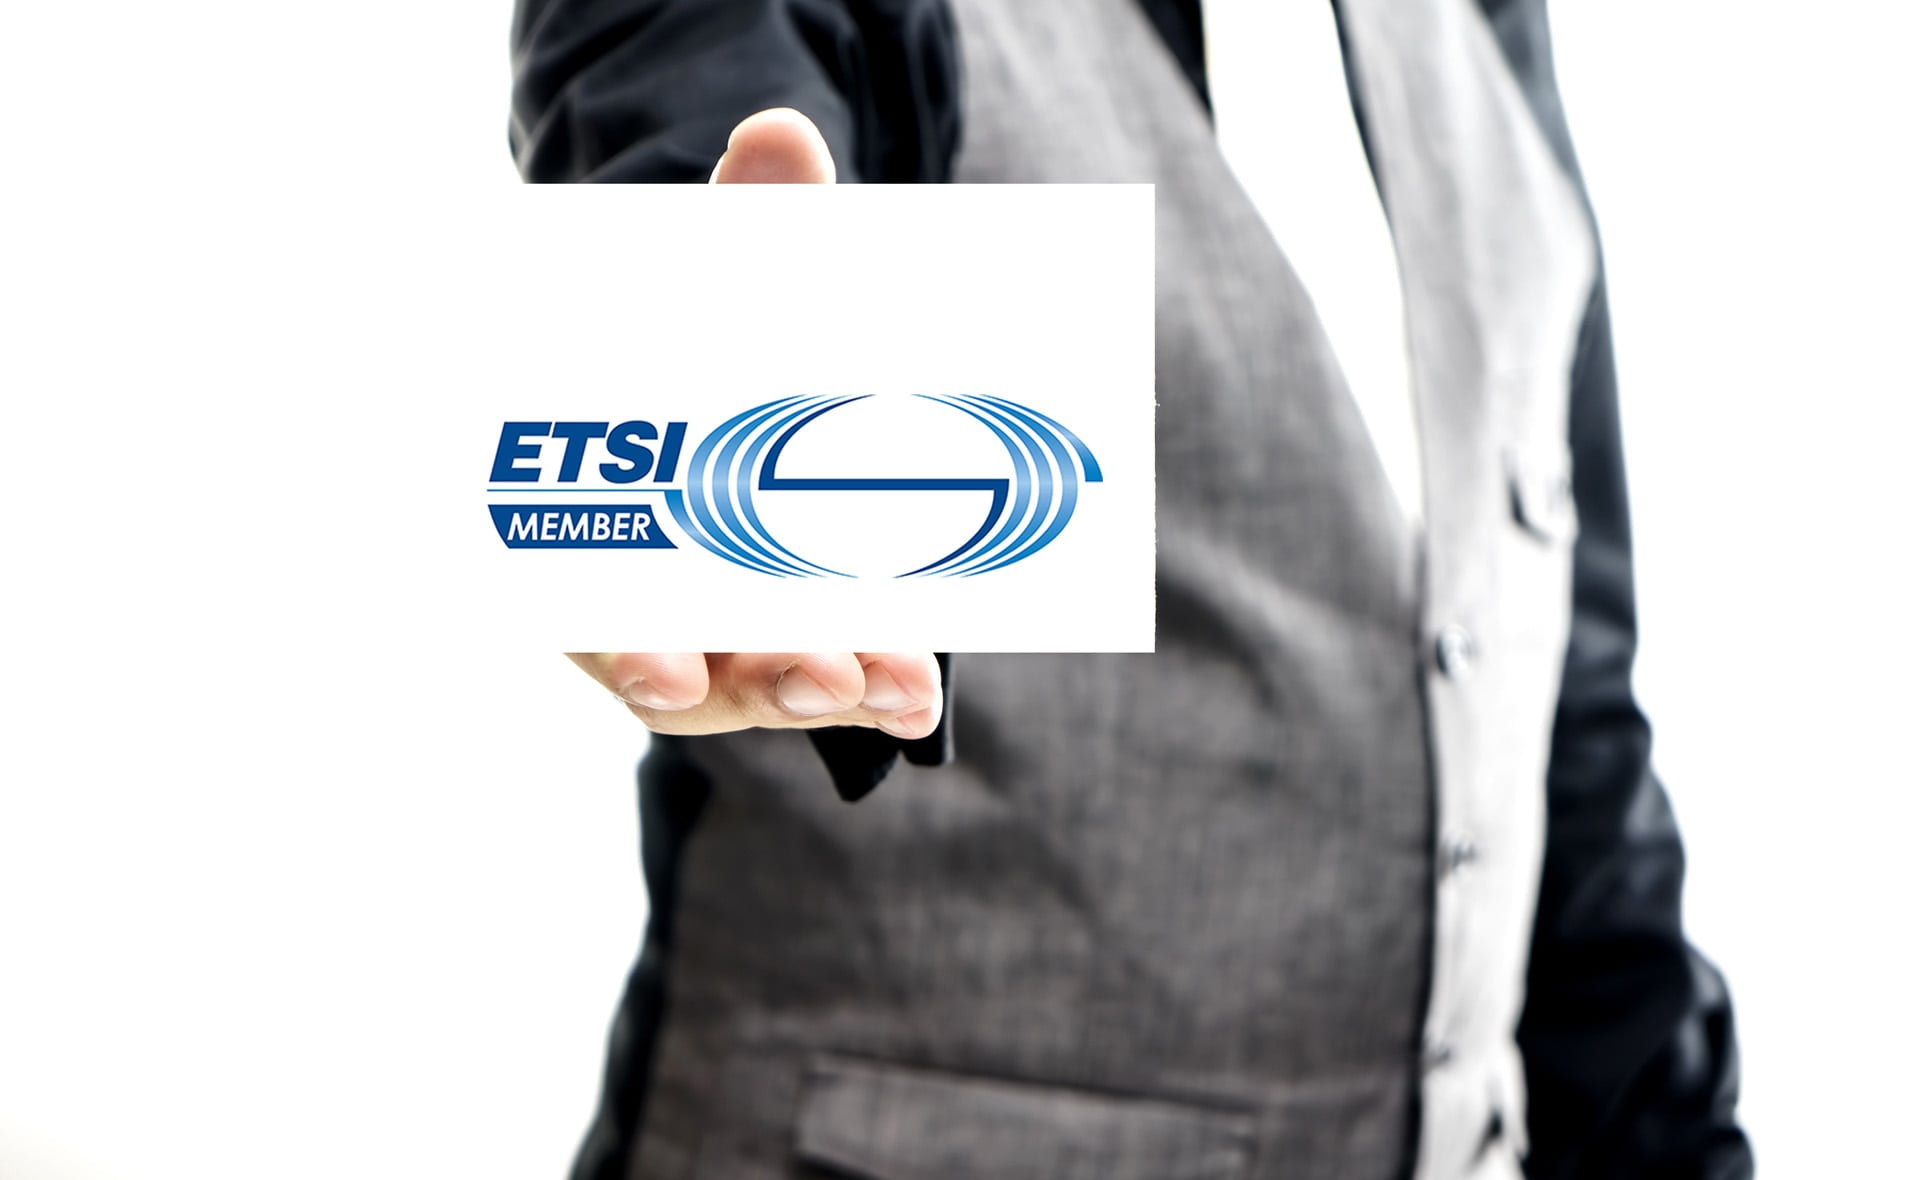 hand holding card with ETSI member written on it